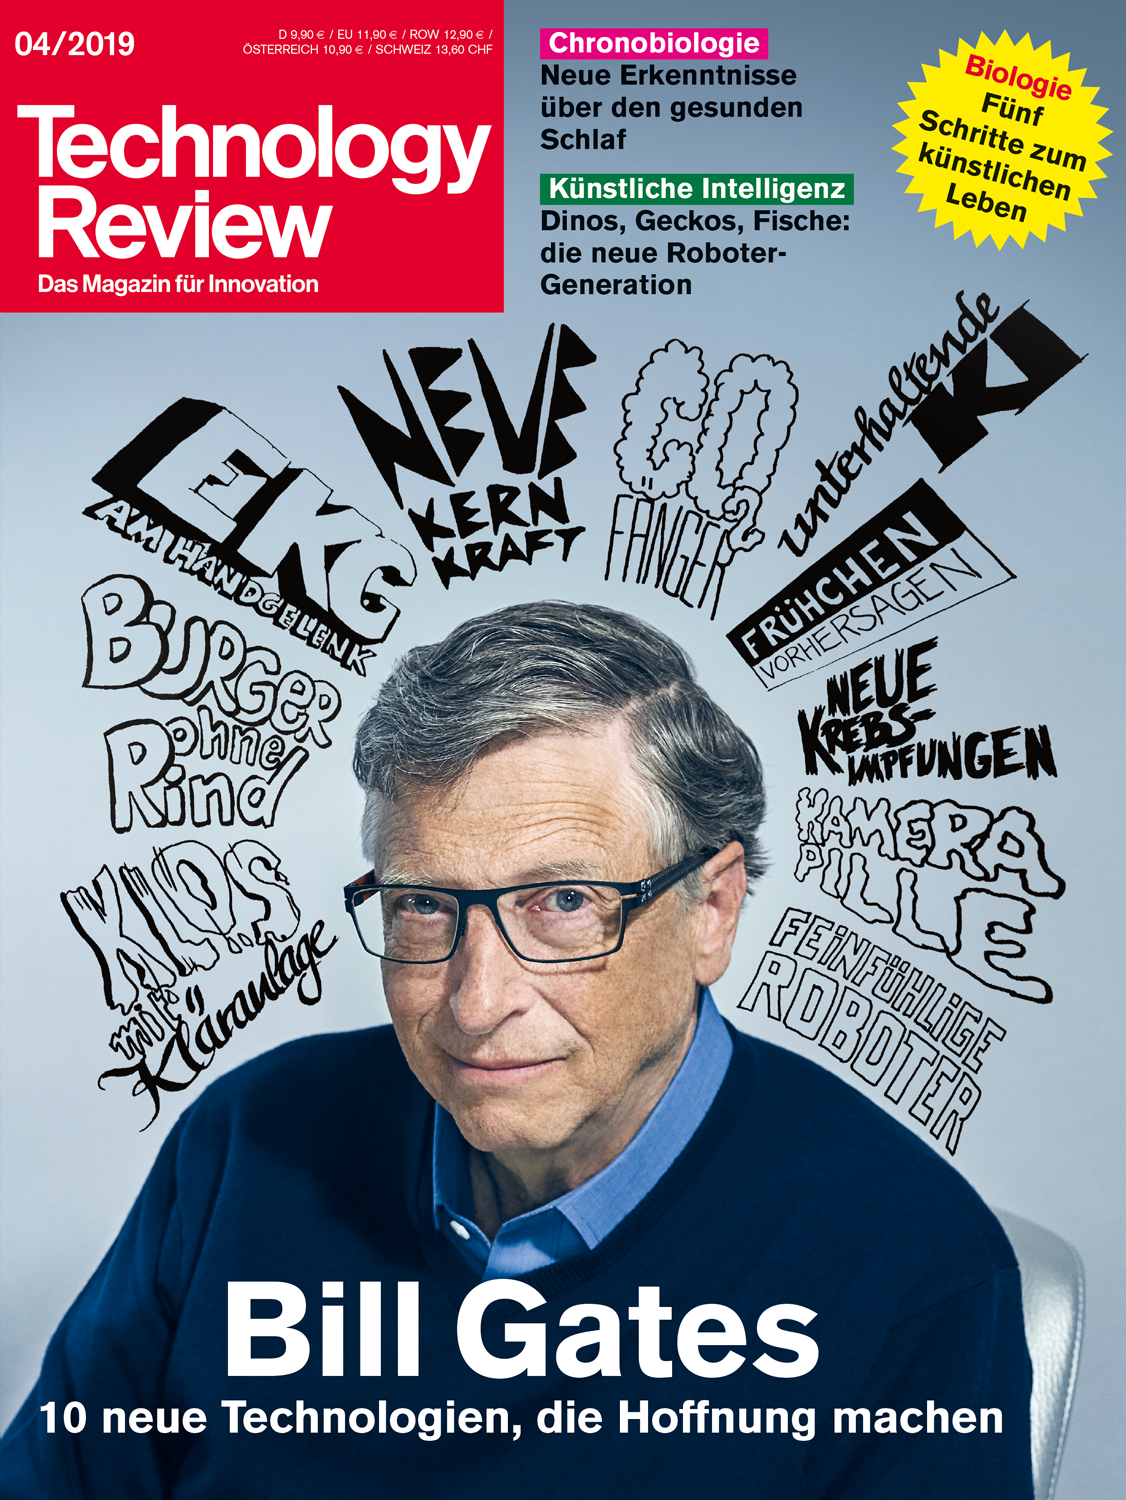 Technology Review 04/2019